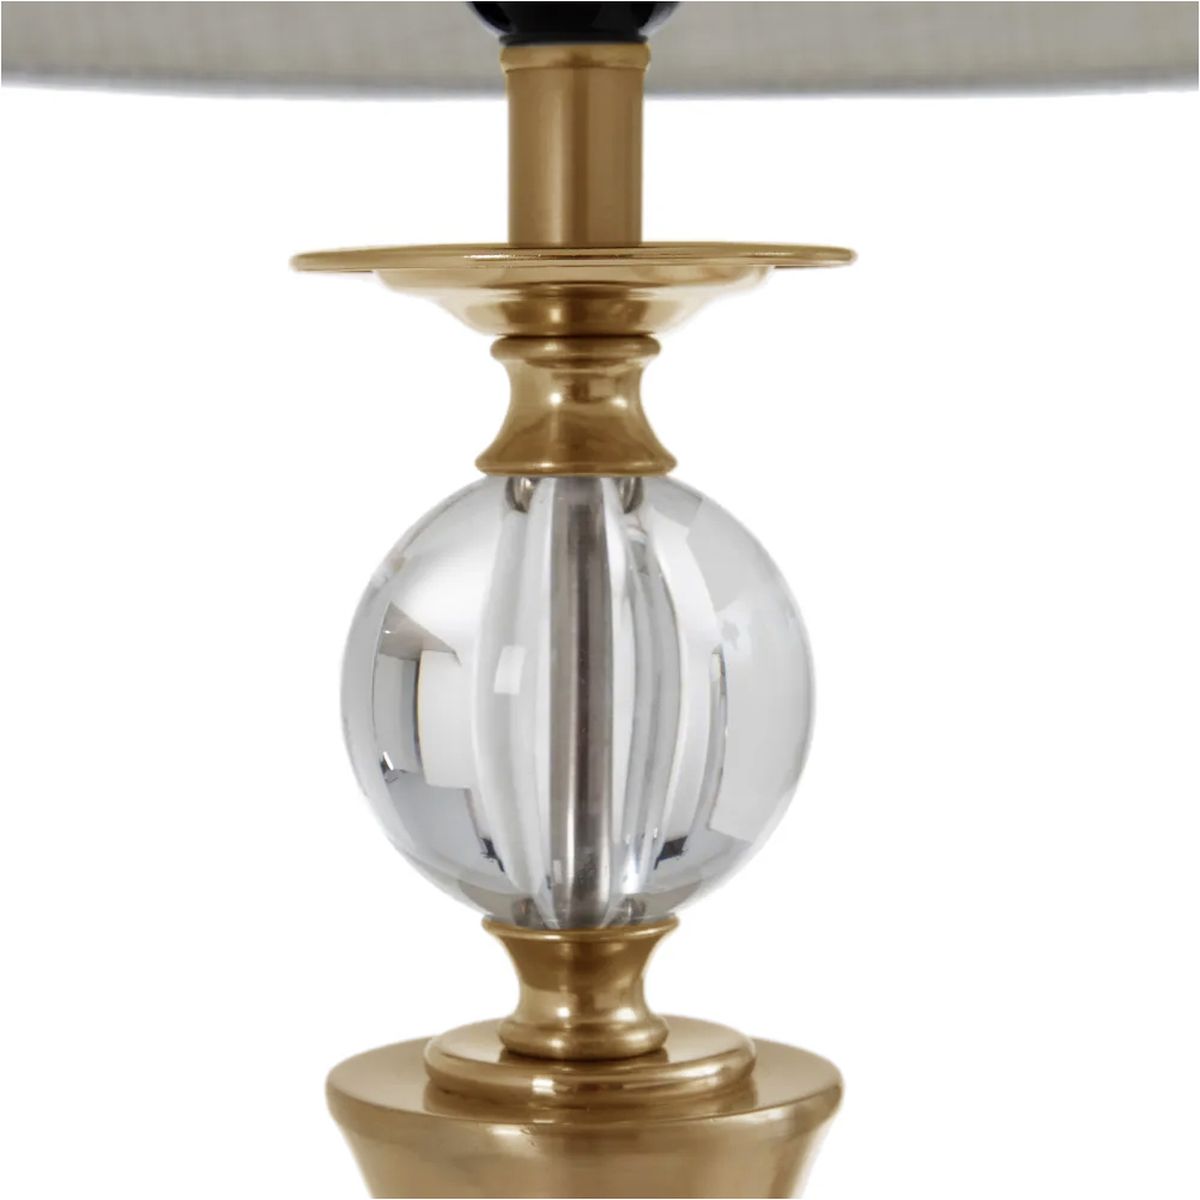 Table lamp in metal, gold color